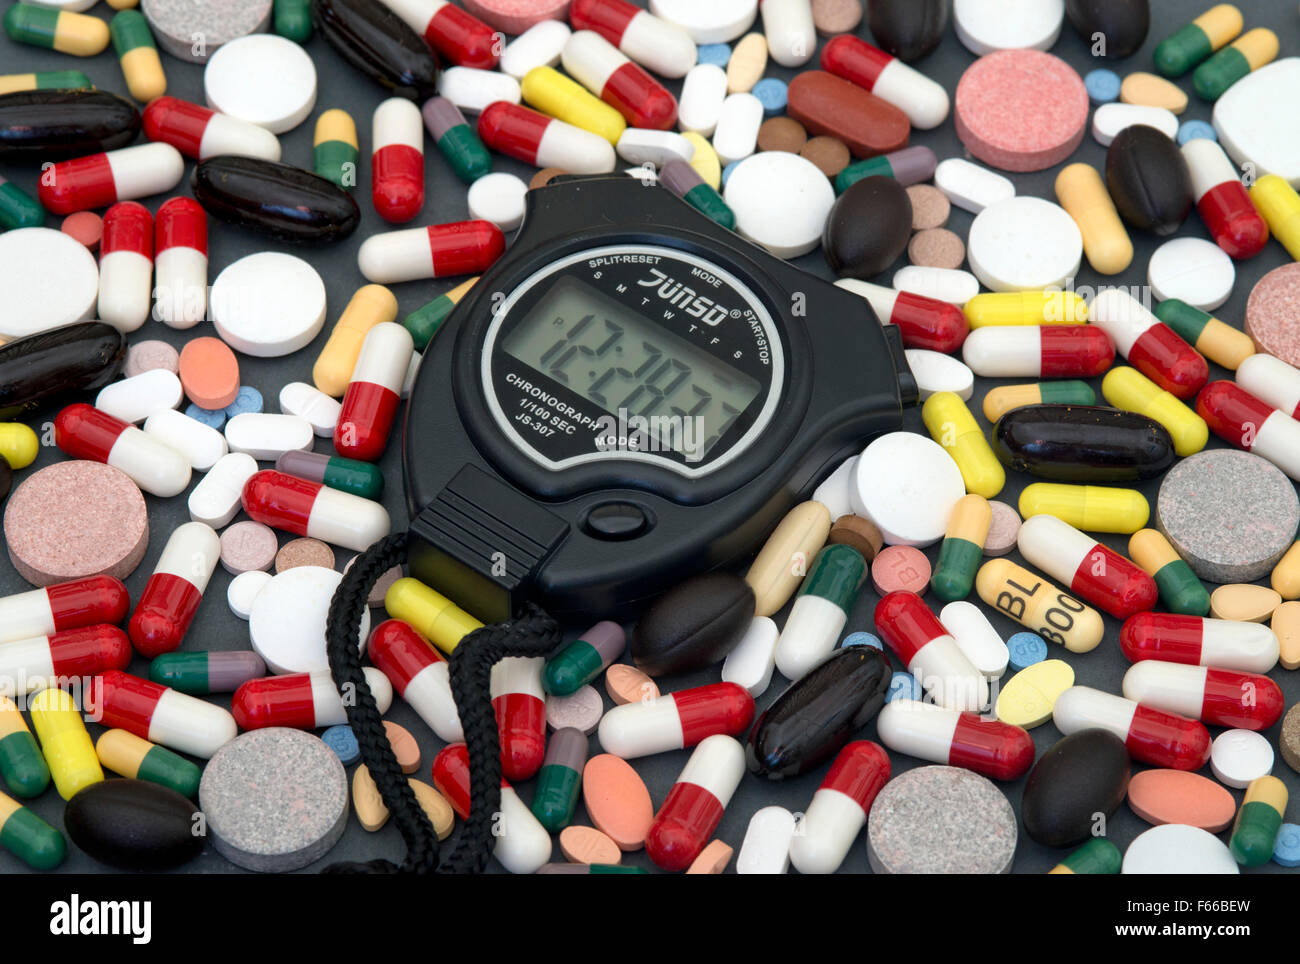 Concept picture of selection of drugs with a sports stopwatch,re Russian athlete doping scandal involving WADA IAAF.a UK Russia Stock Photo